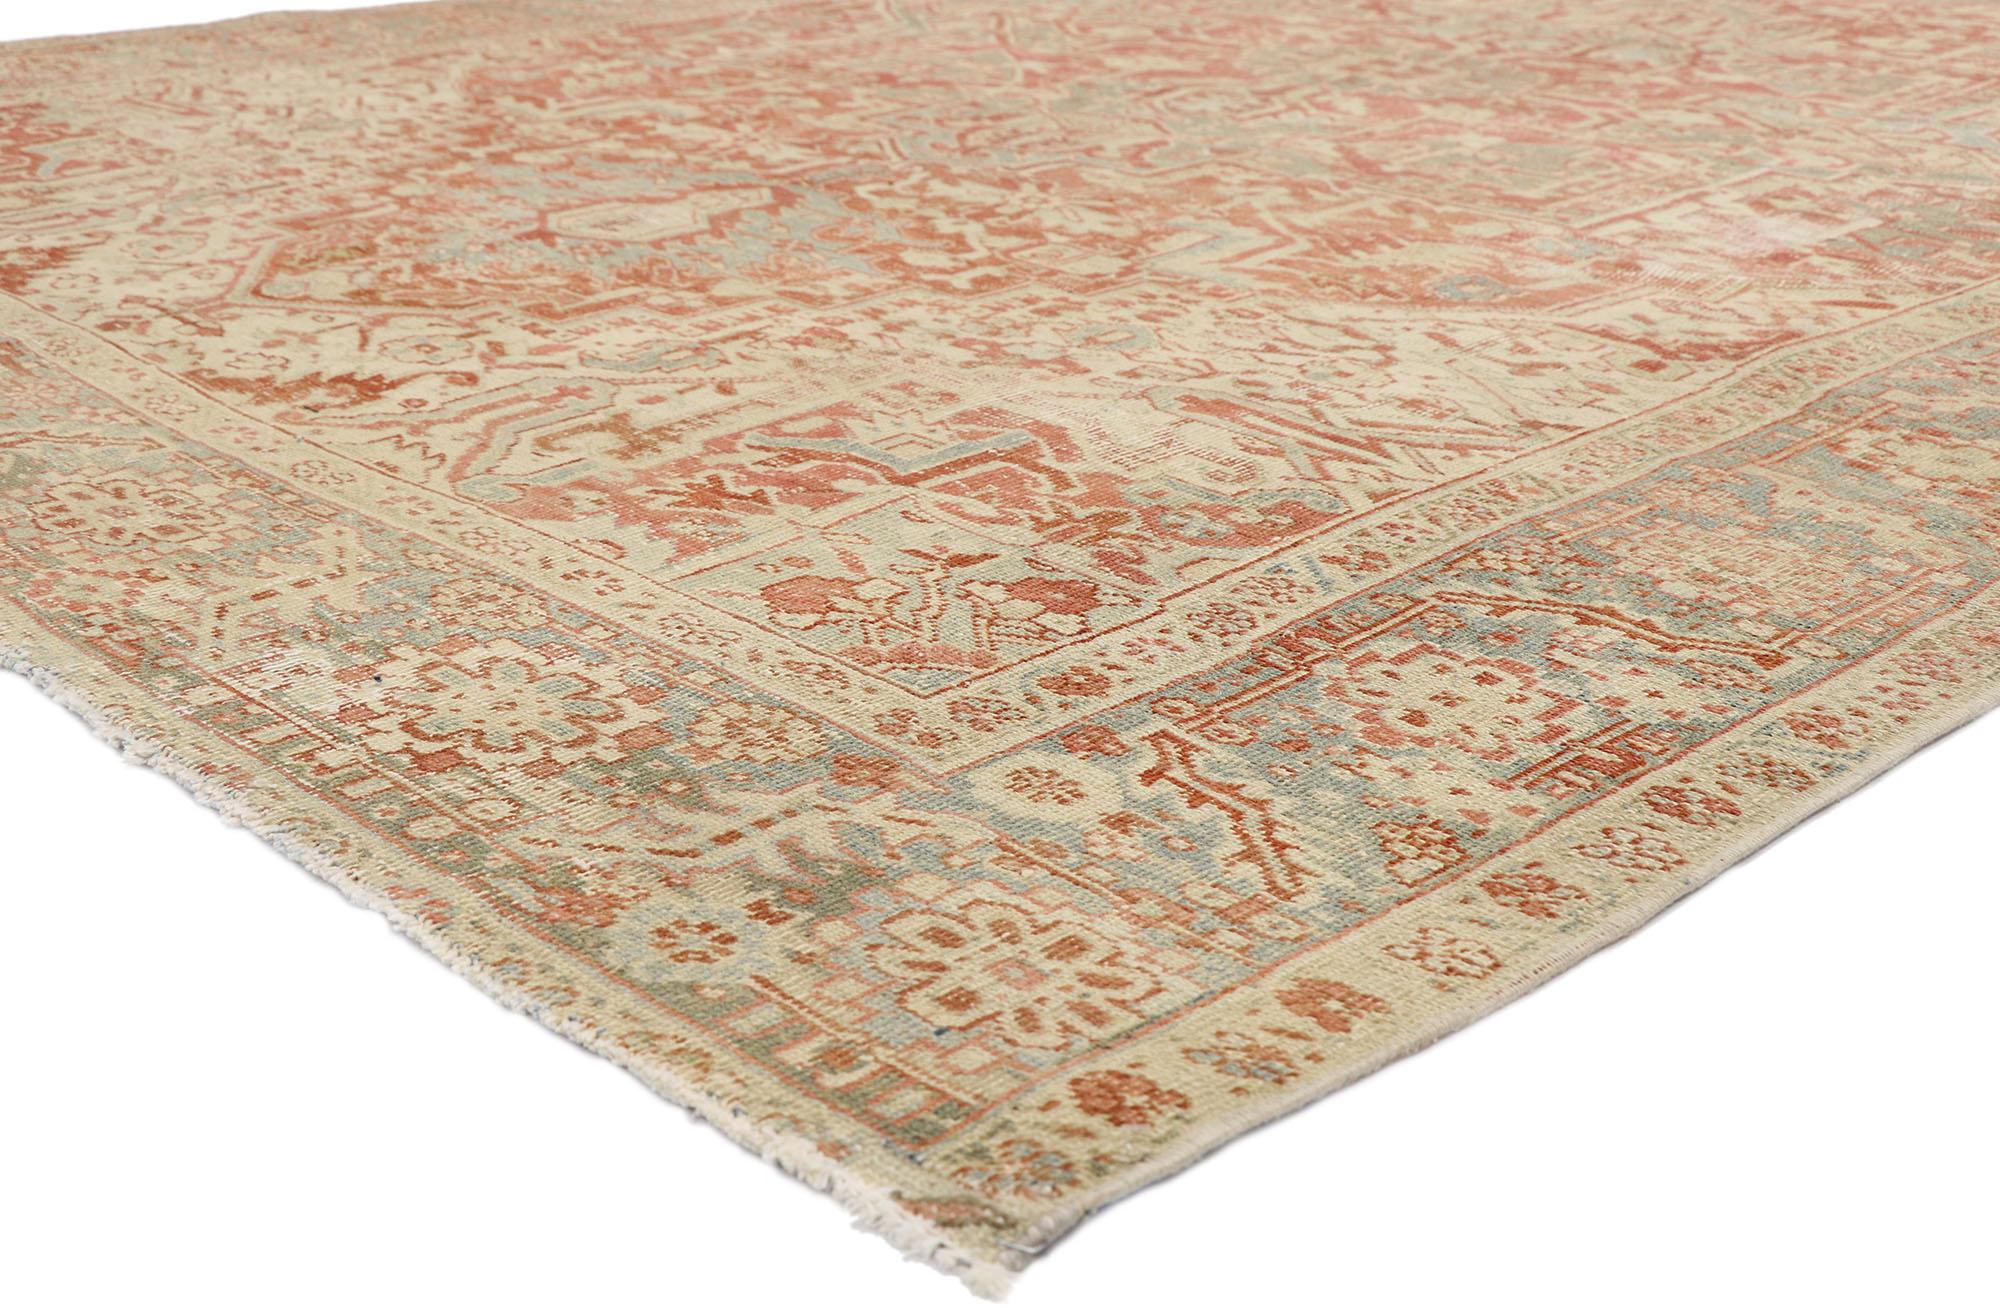 52668, distressed antique Persian Heriz Design rug with Rustic Bungalow style. This hand knotted wool distressed antique Persian Heriz design rug features a large octofoil medallion with flaming palmette pendants floating in the center of an